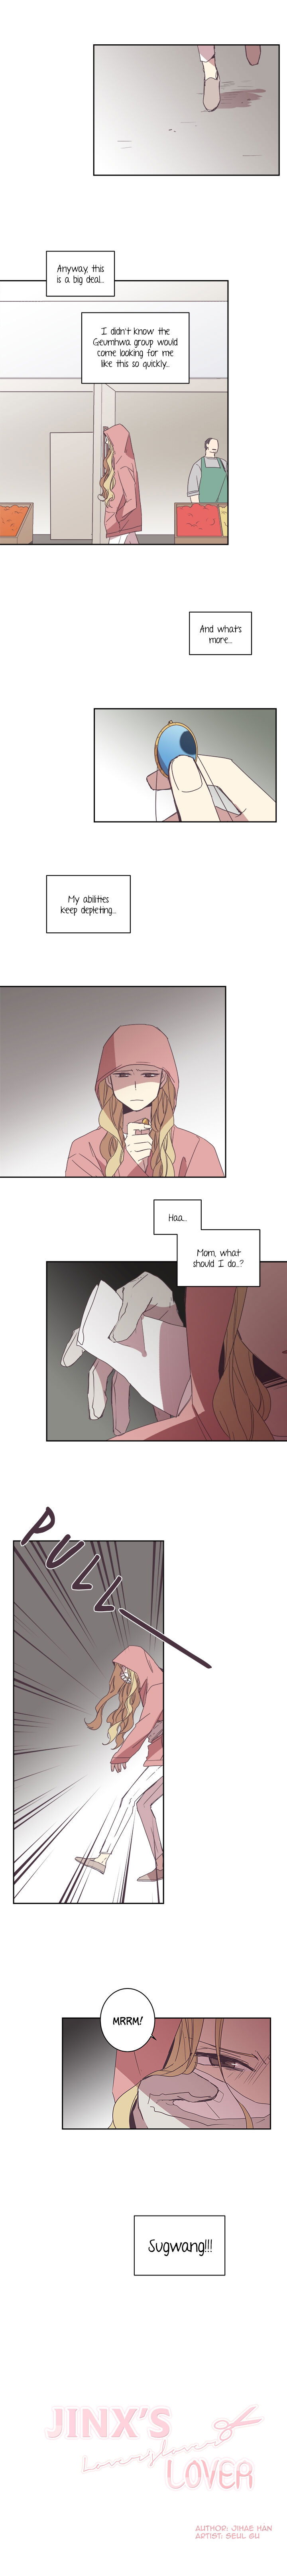 Jinx Yeon-in Chapter 046 page 2